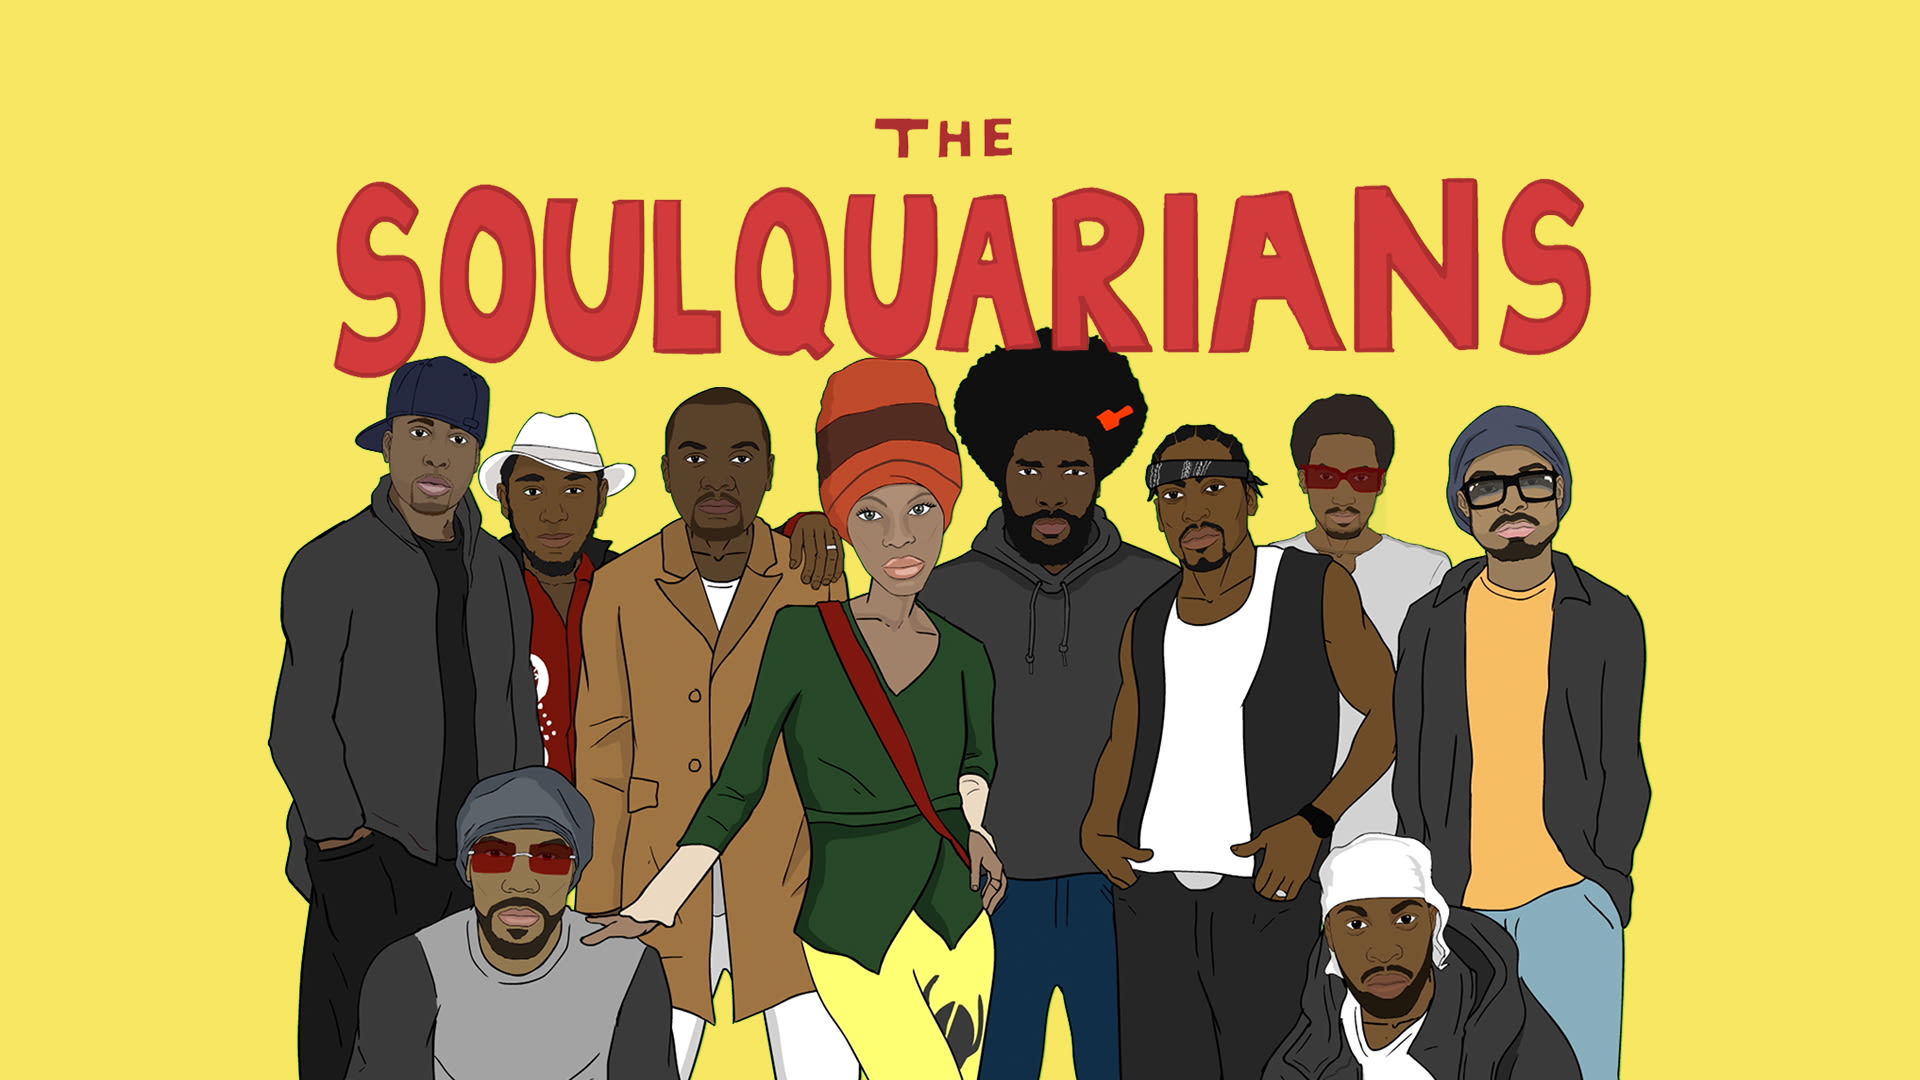 The Soulquarians: The Collaboration Between Erykah Badu, Questlove,  D’Angelo, and More